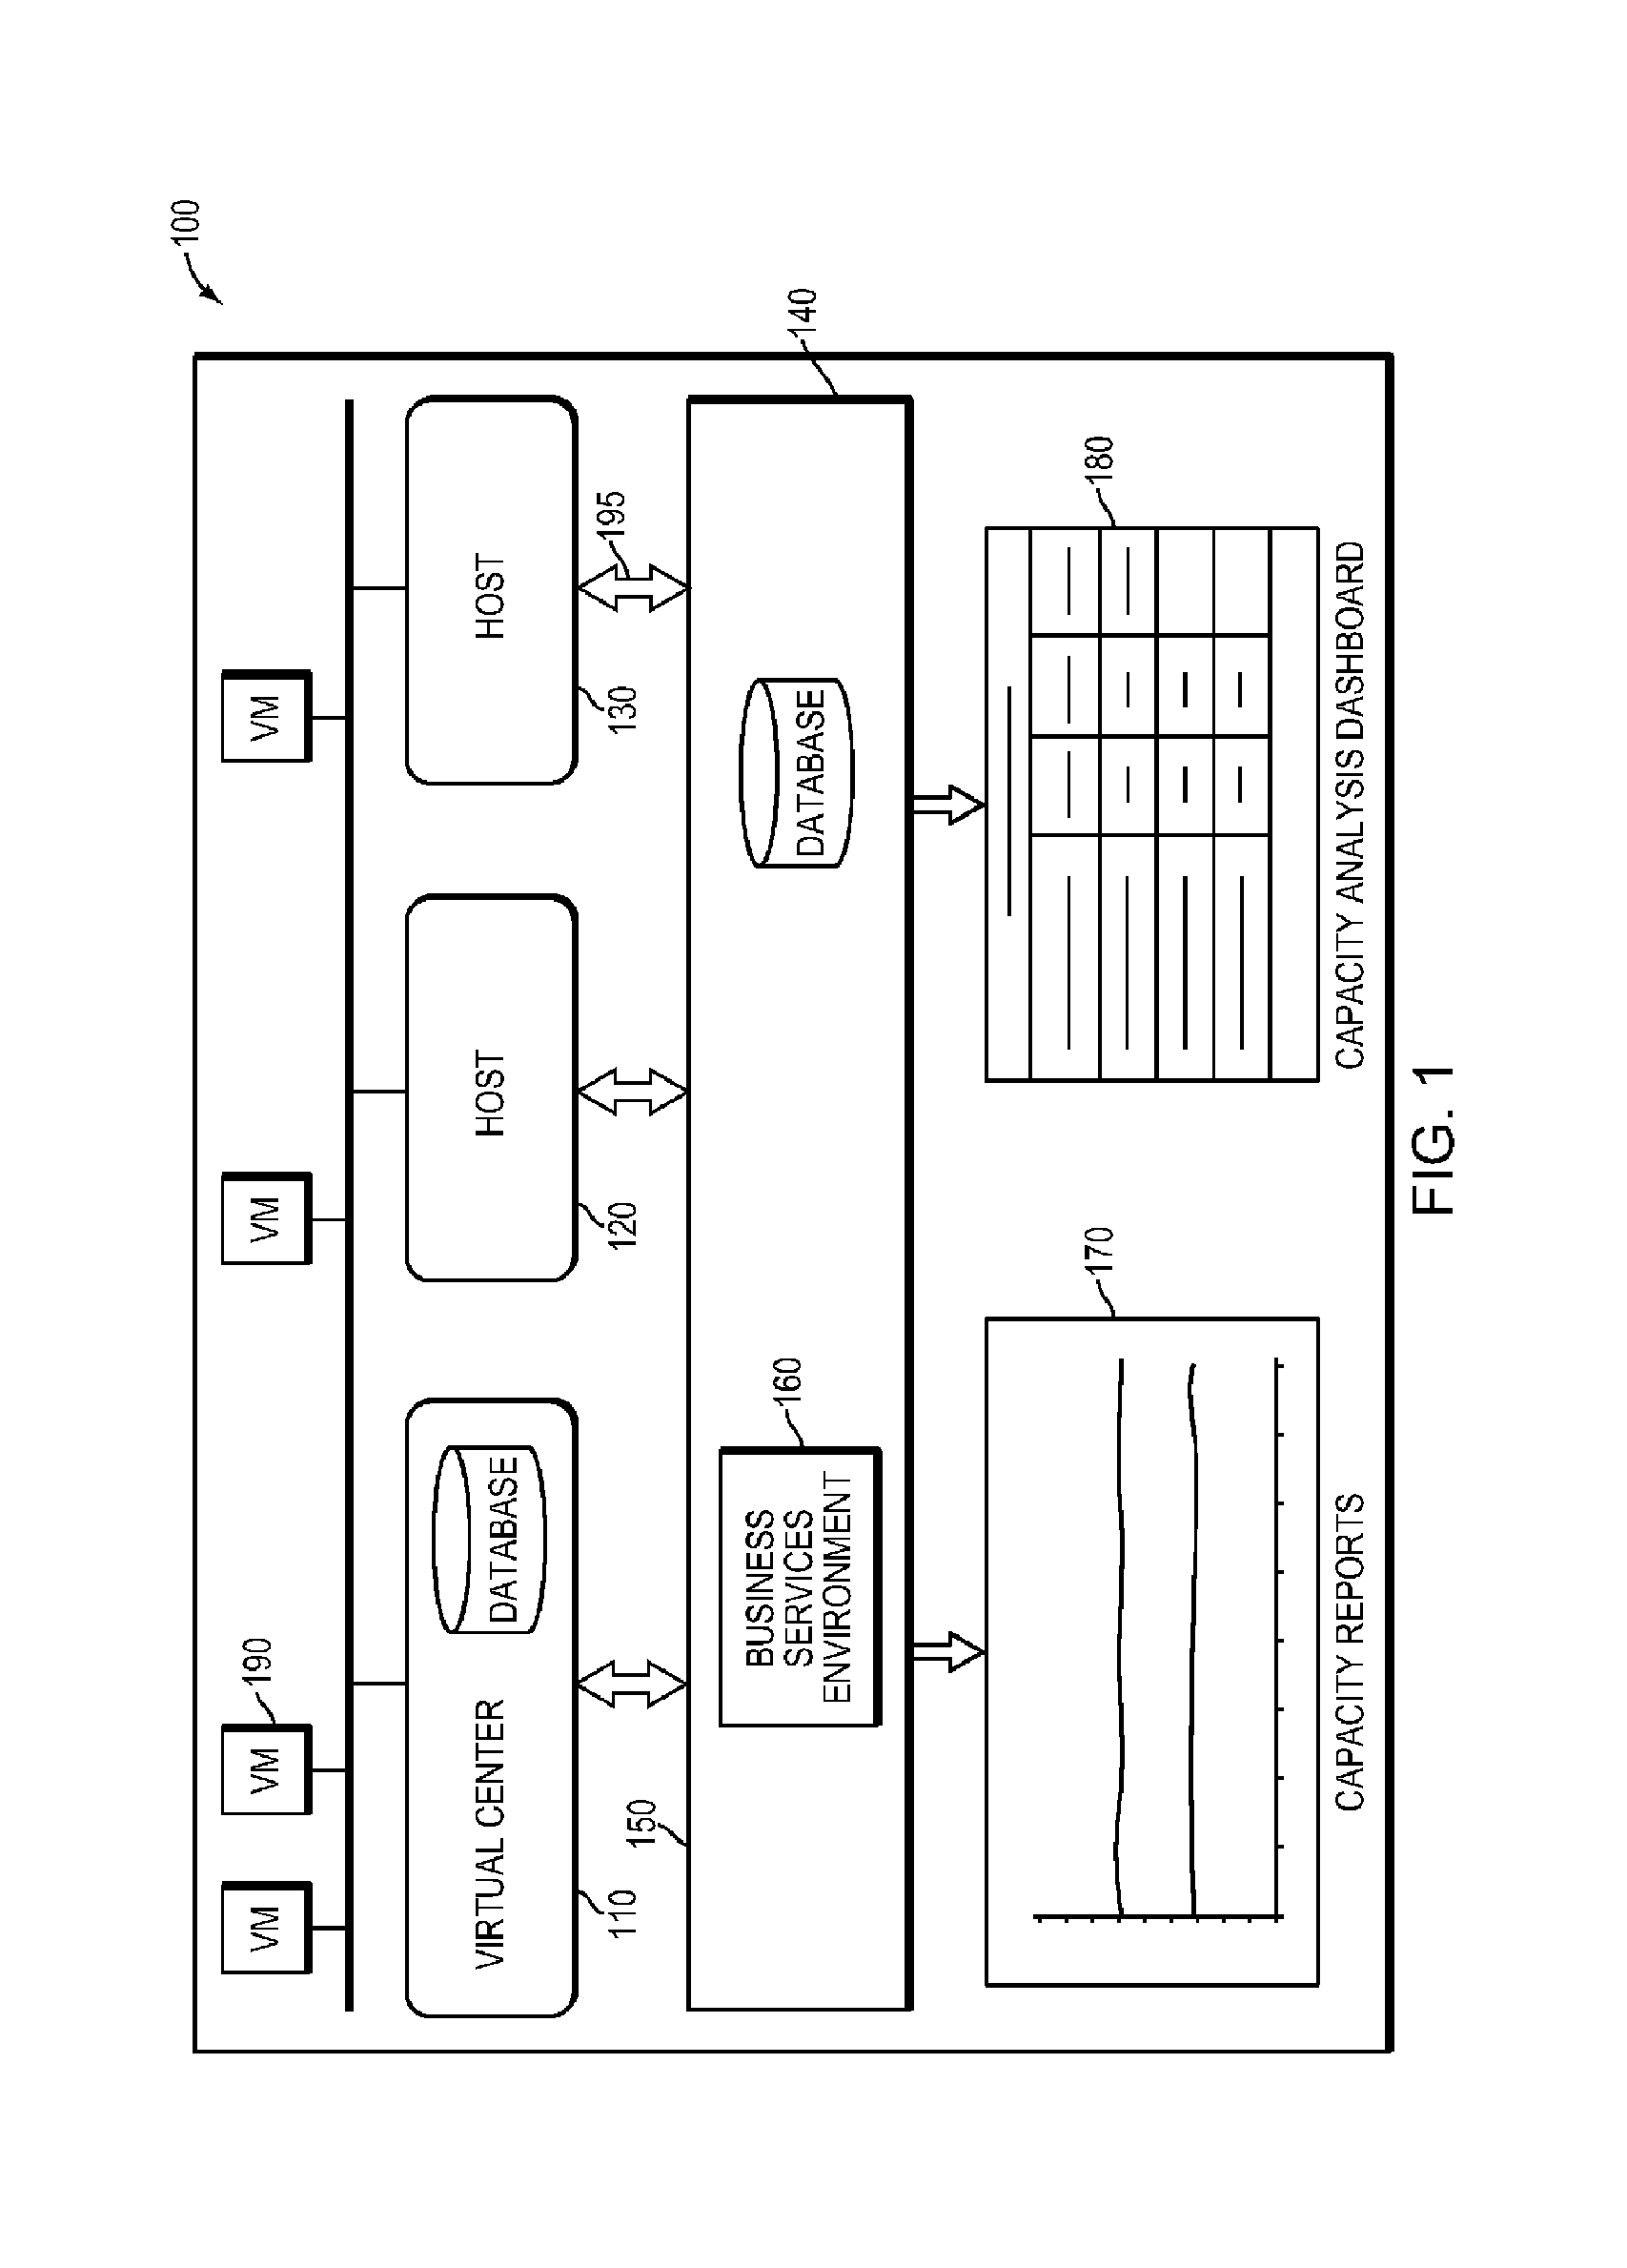 Systems and methods for real-time monitoring of virtualized environments